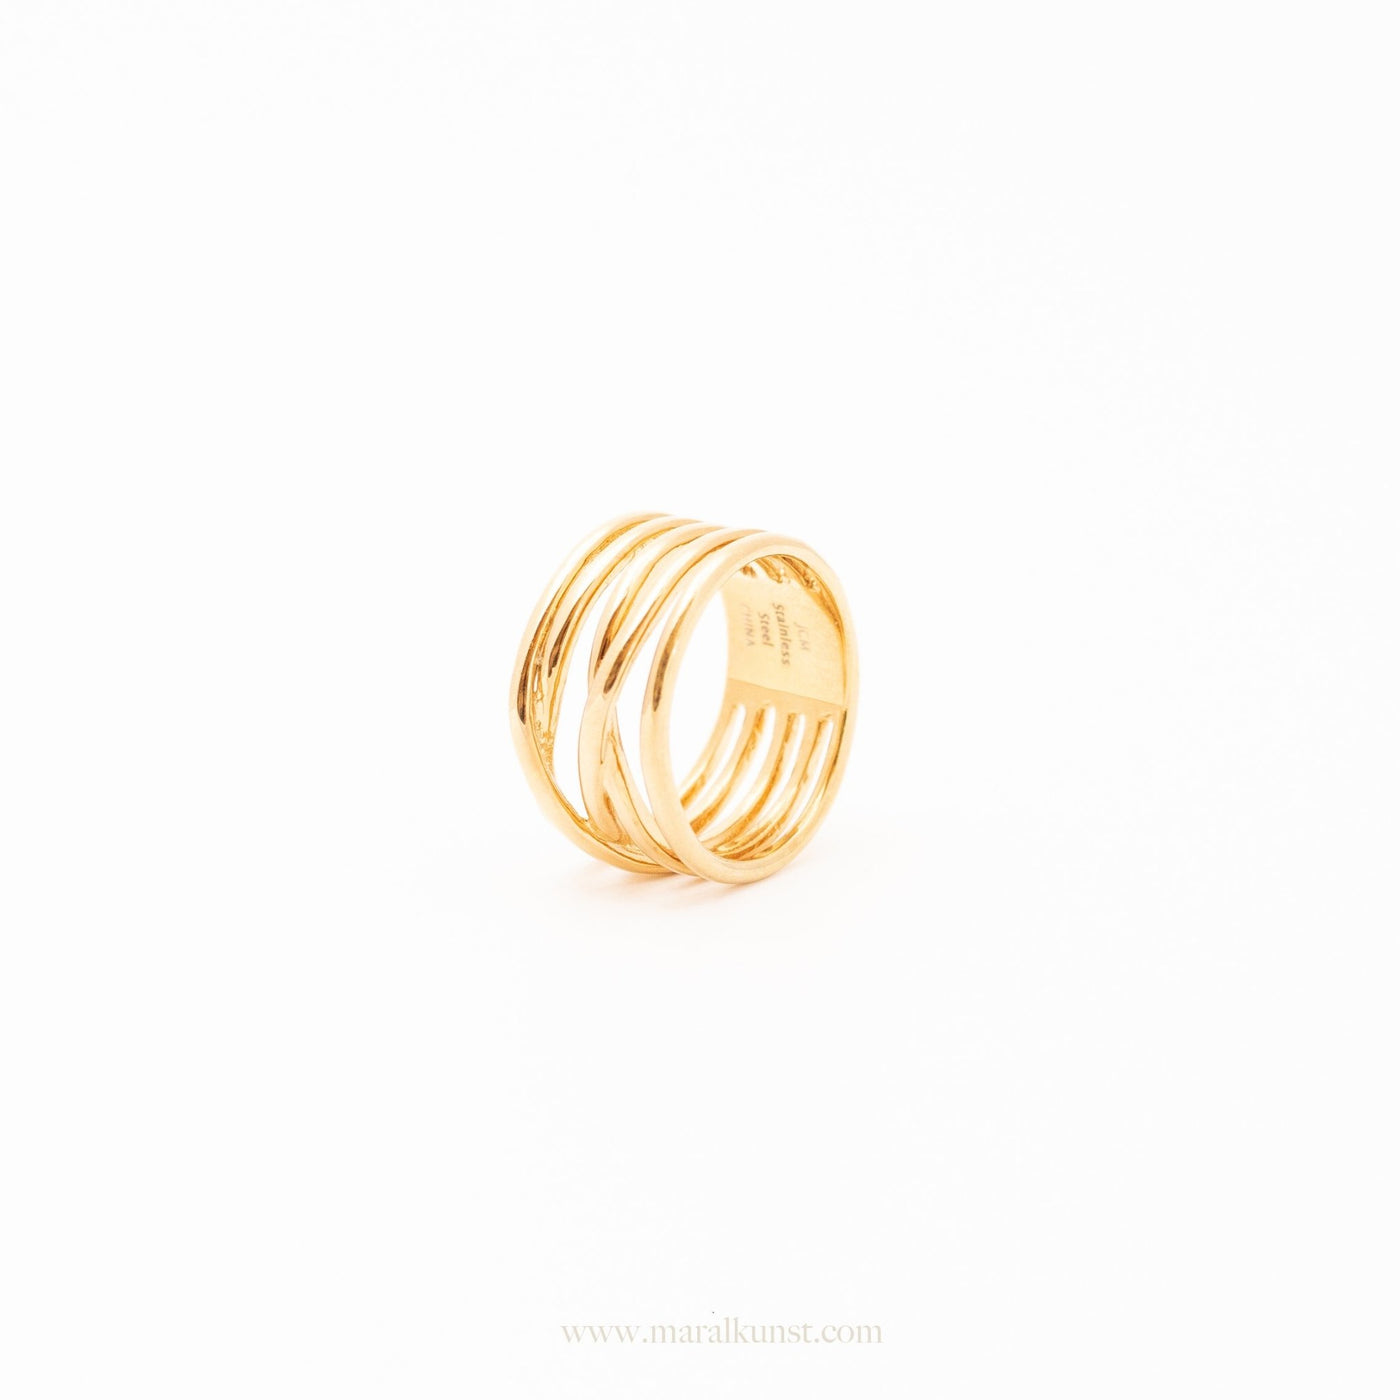 Hazel Intertwined Entwined Ring - Maral Kunst Jewelry